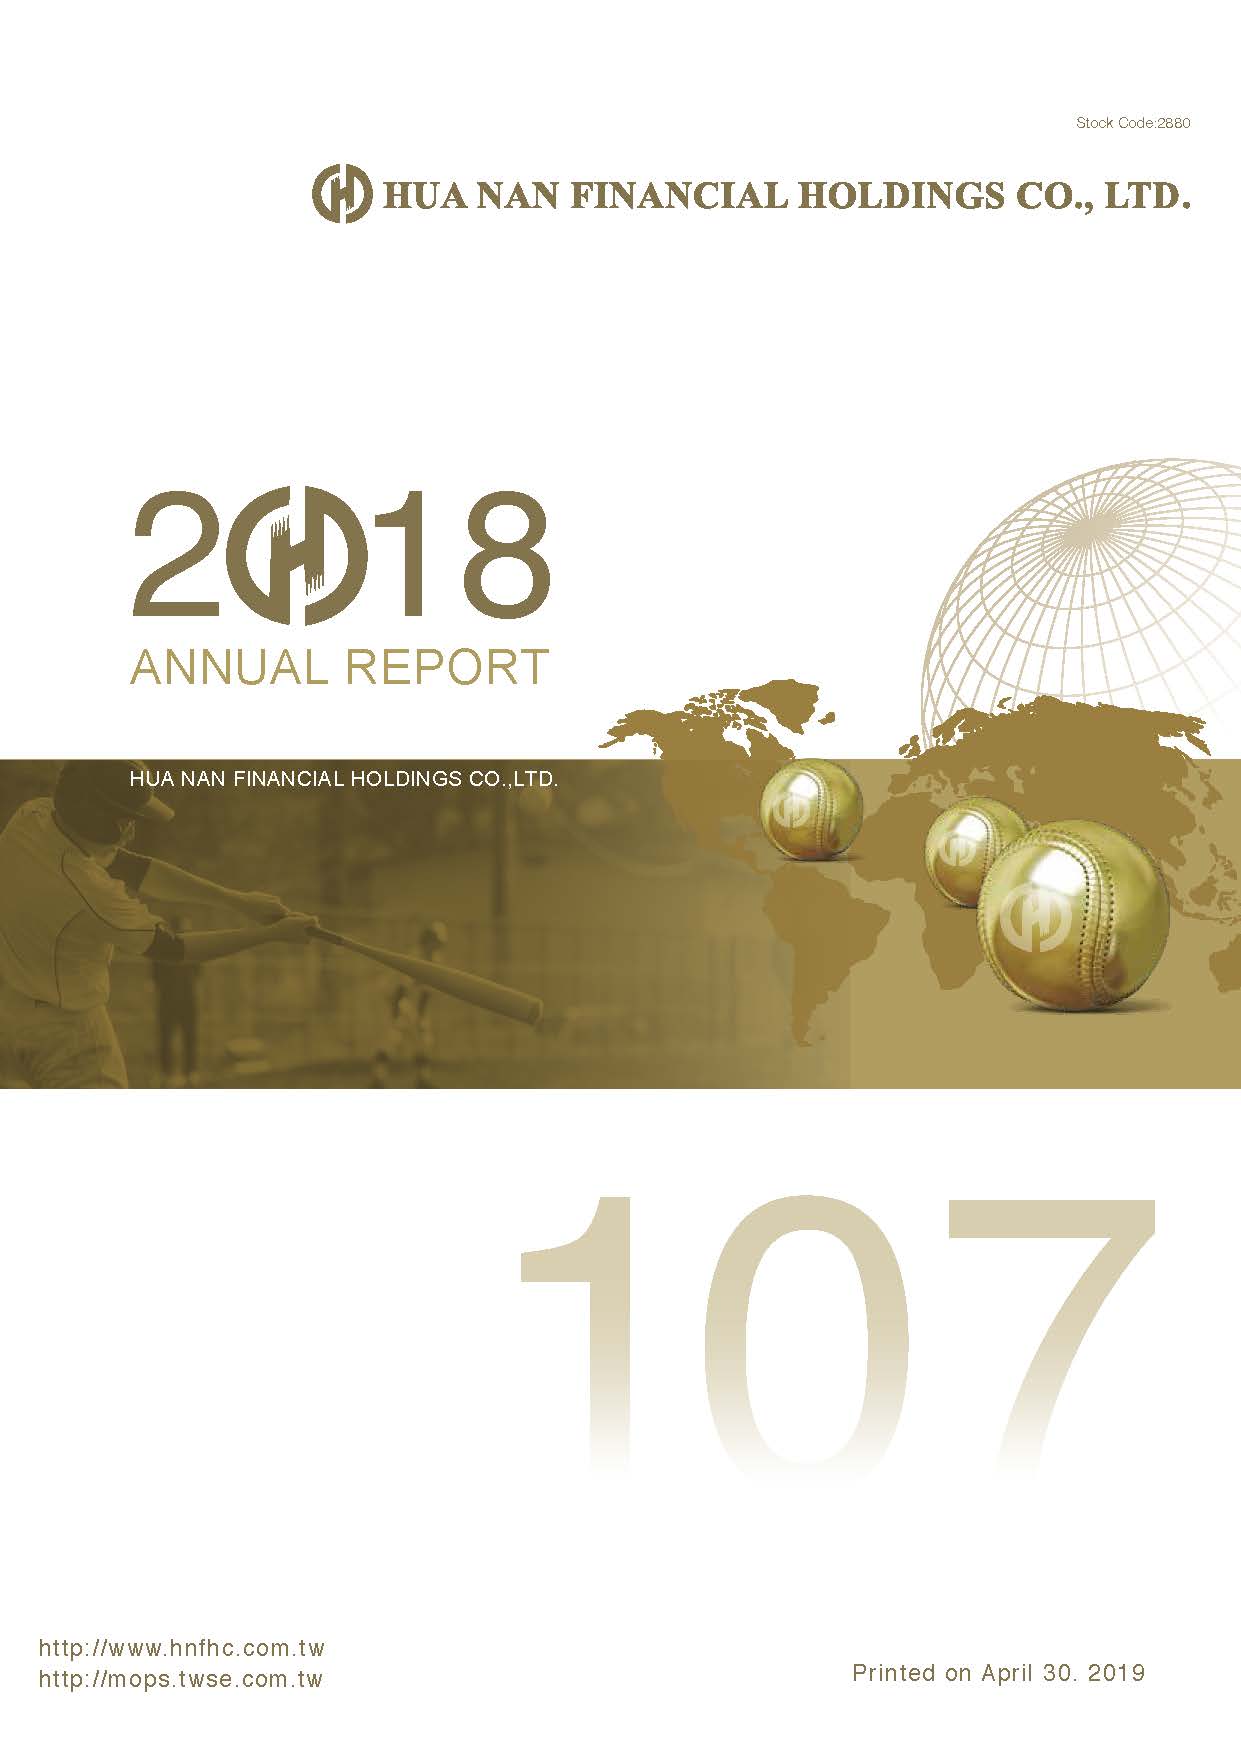 The cover of 2018 Annual Reports